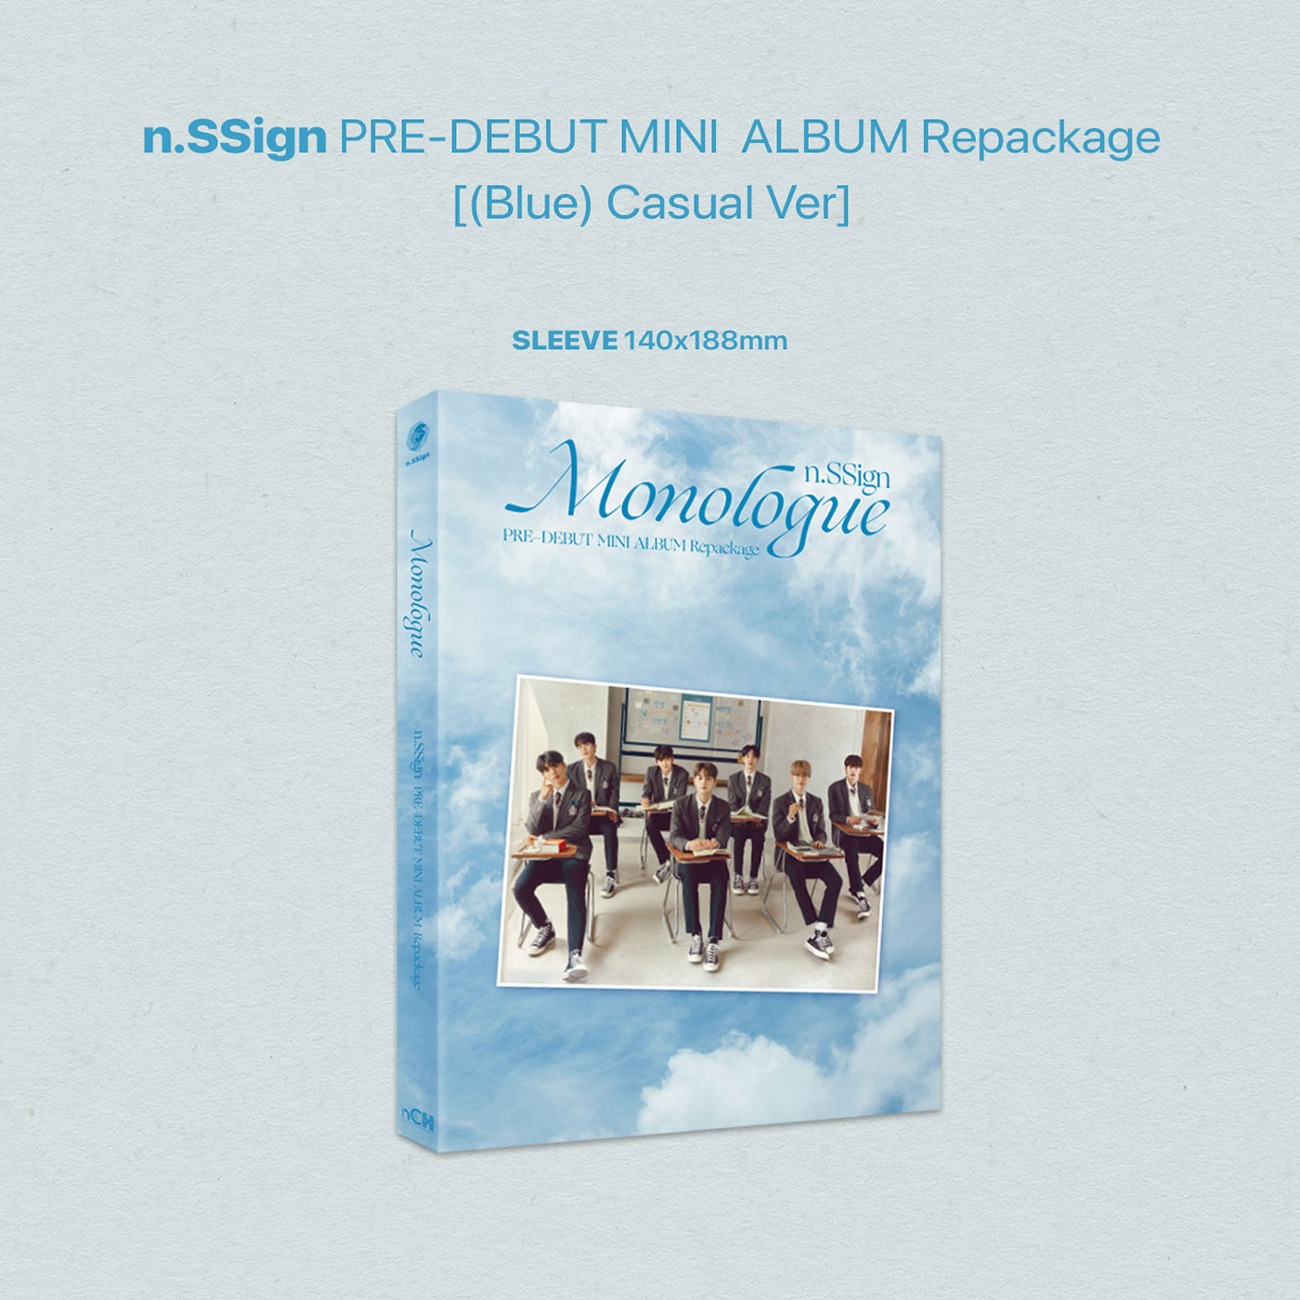 n.SSign - Monologue : PRE-DEBUT MINI ALBUM Repackage - official Kgoods